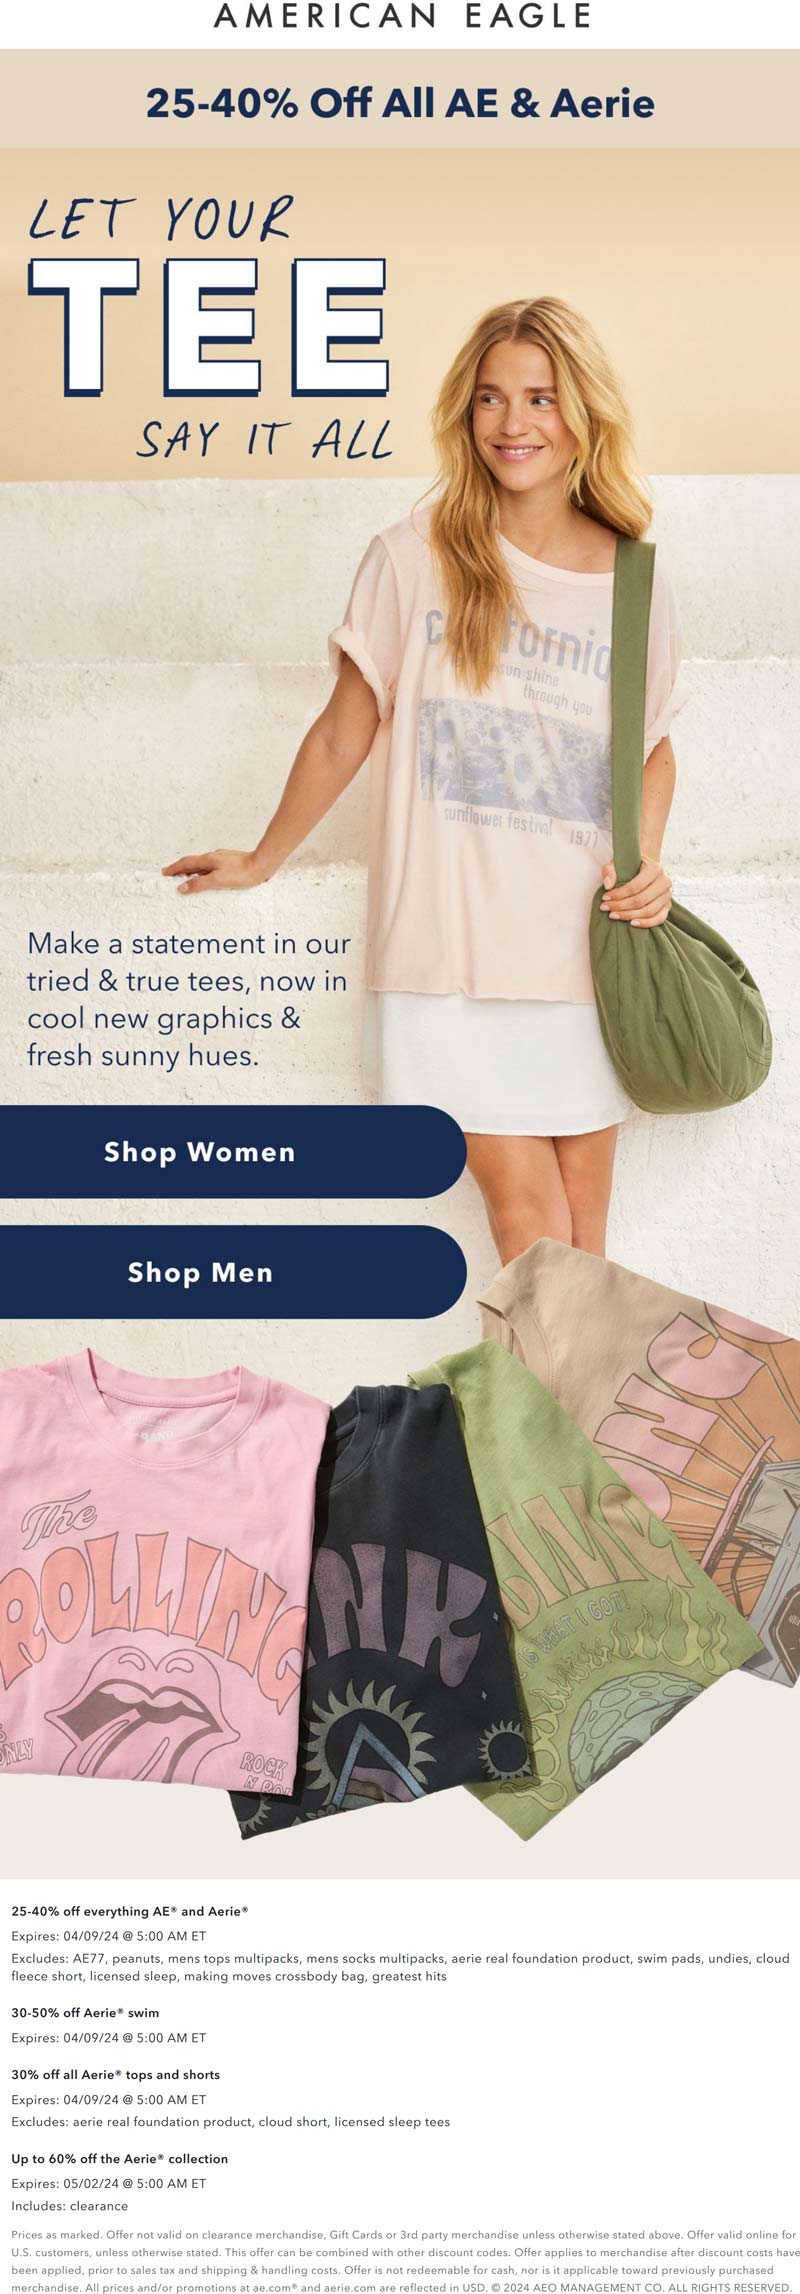 American Eagle stores Coupon  25-40% off all AE & Aerie at American Eagle #americaneagle 